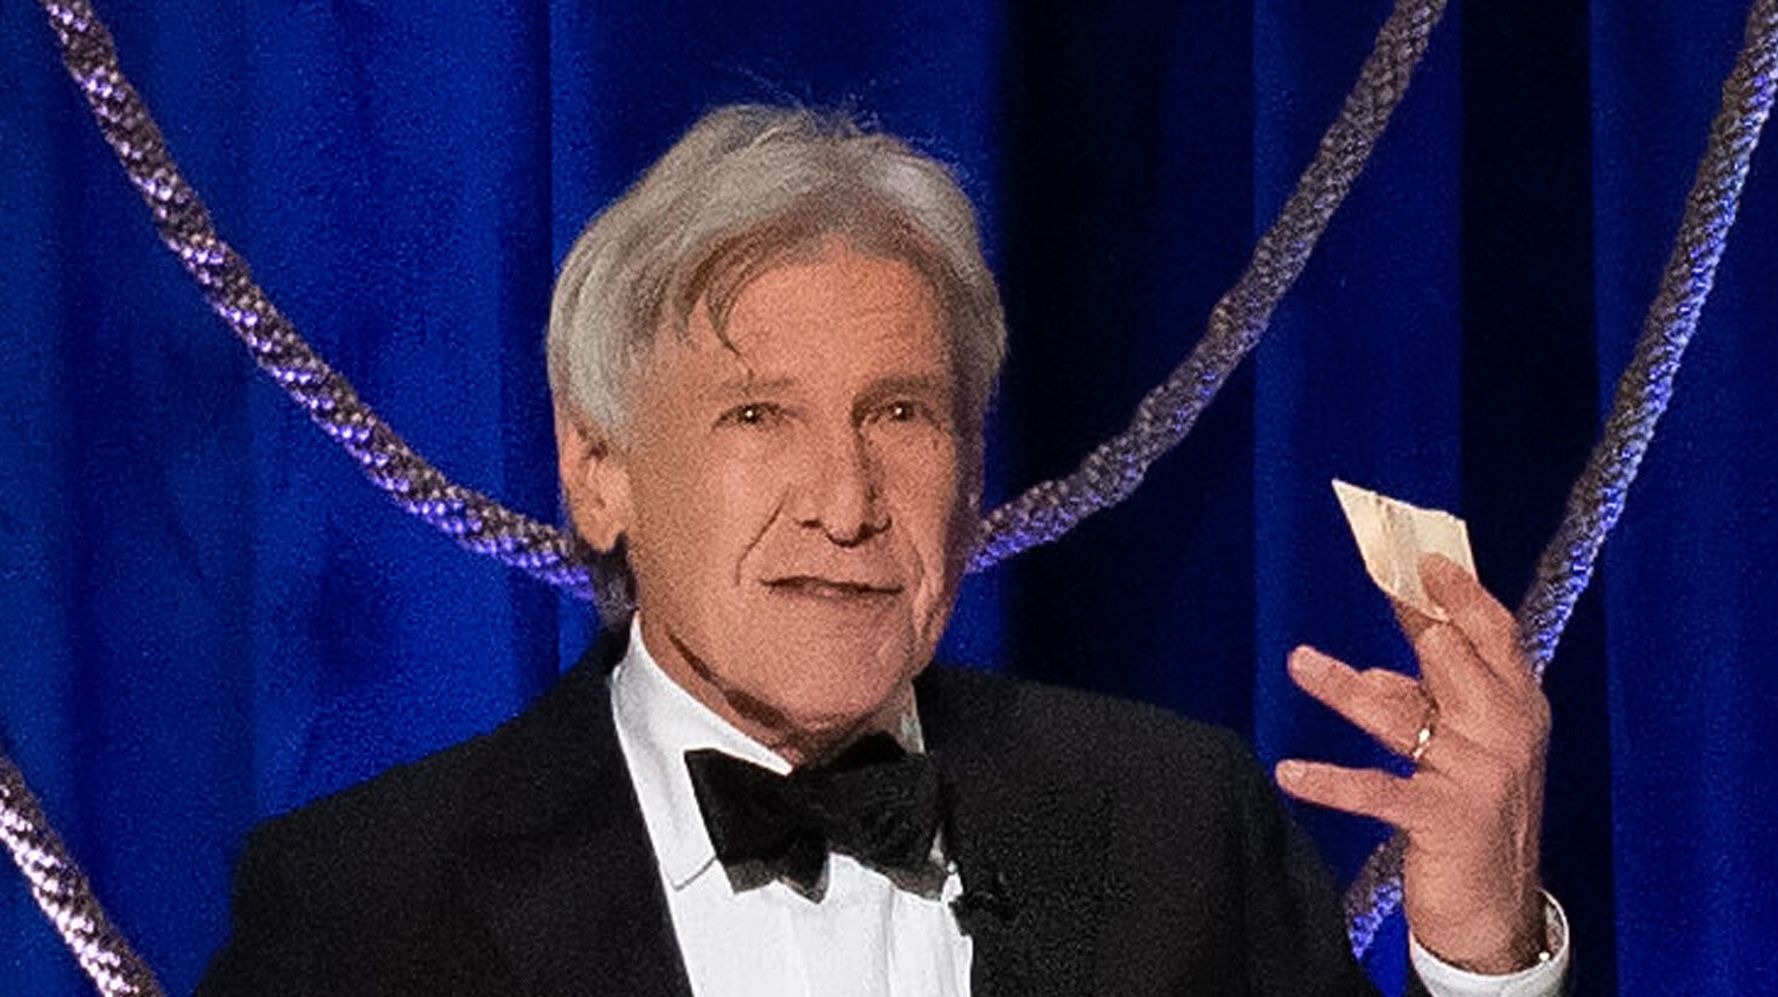 Harrison Ford Wins The Oscar For Strangest Academy Awards Intro Of The